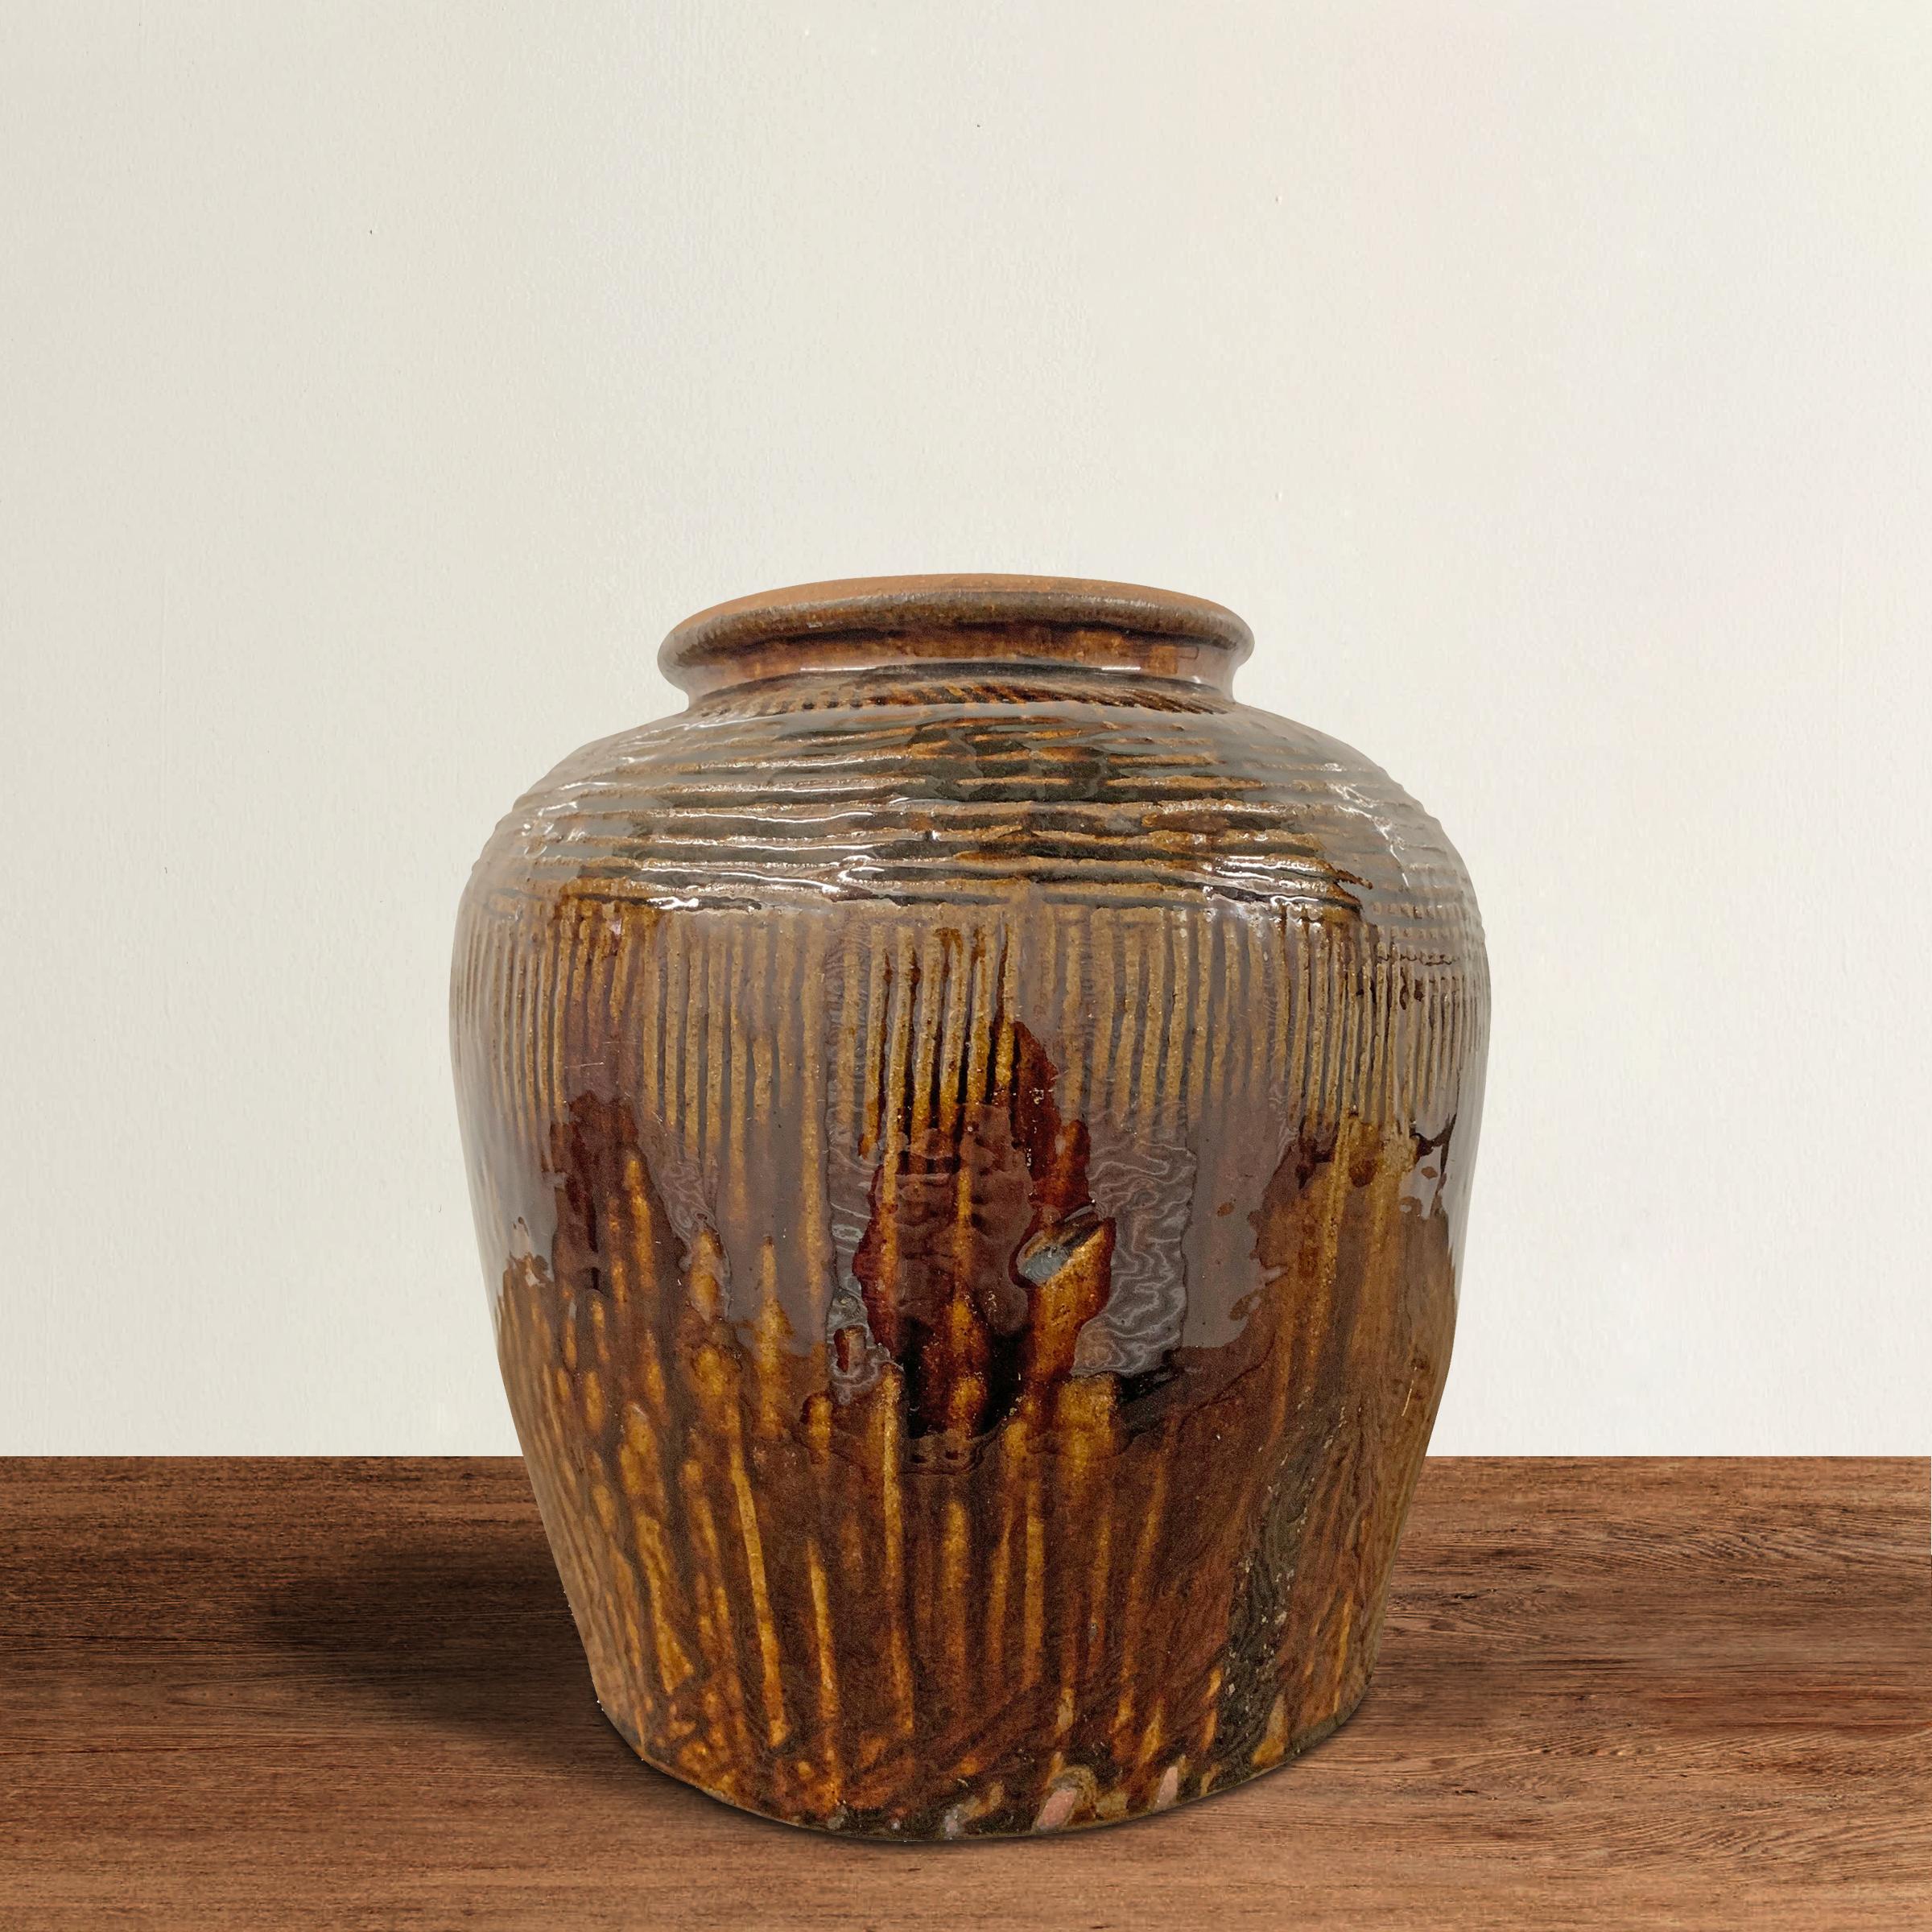 A beautiful early 20th century Chinese brown glazed pot with a raked pattern around the top half of the jar and a drippy glaze pattern around the bottom. Would be an excellent vase for flowers or converted into a table lamp.